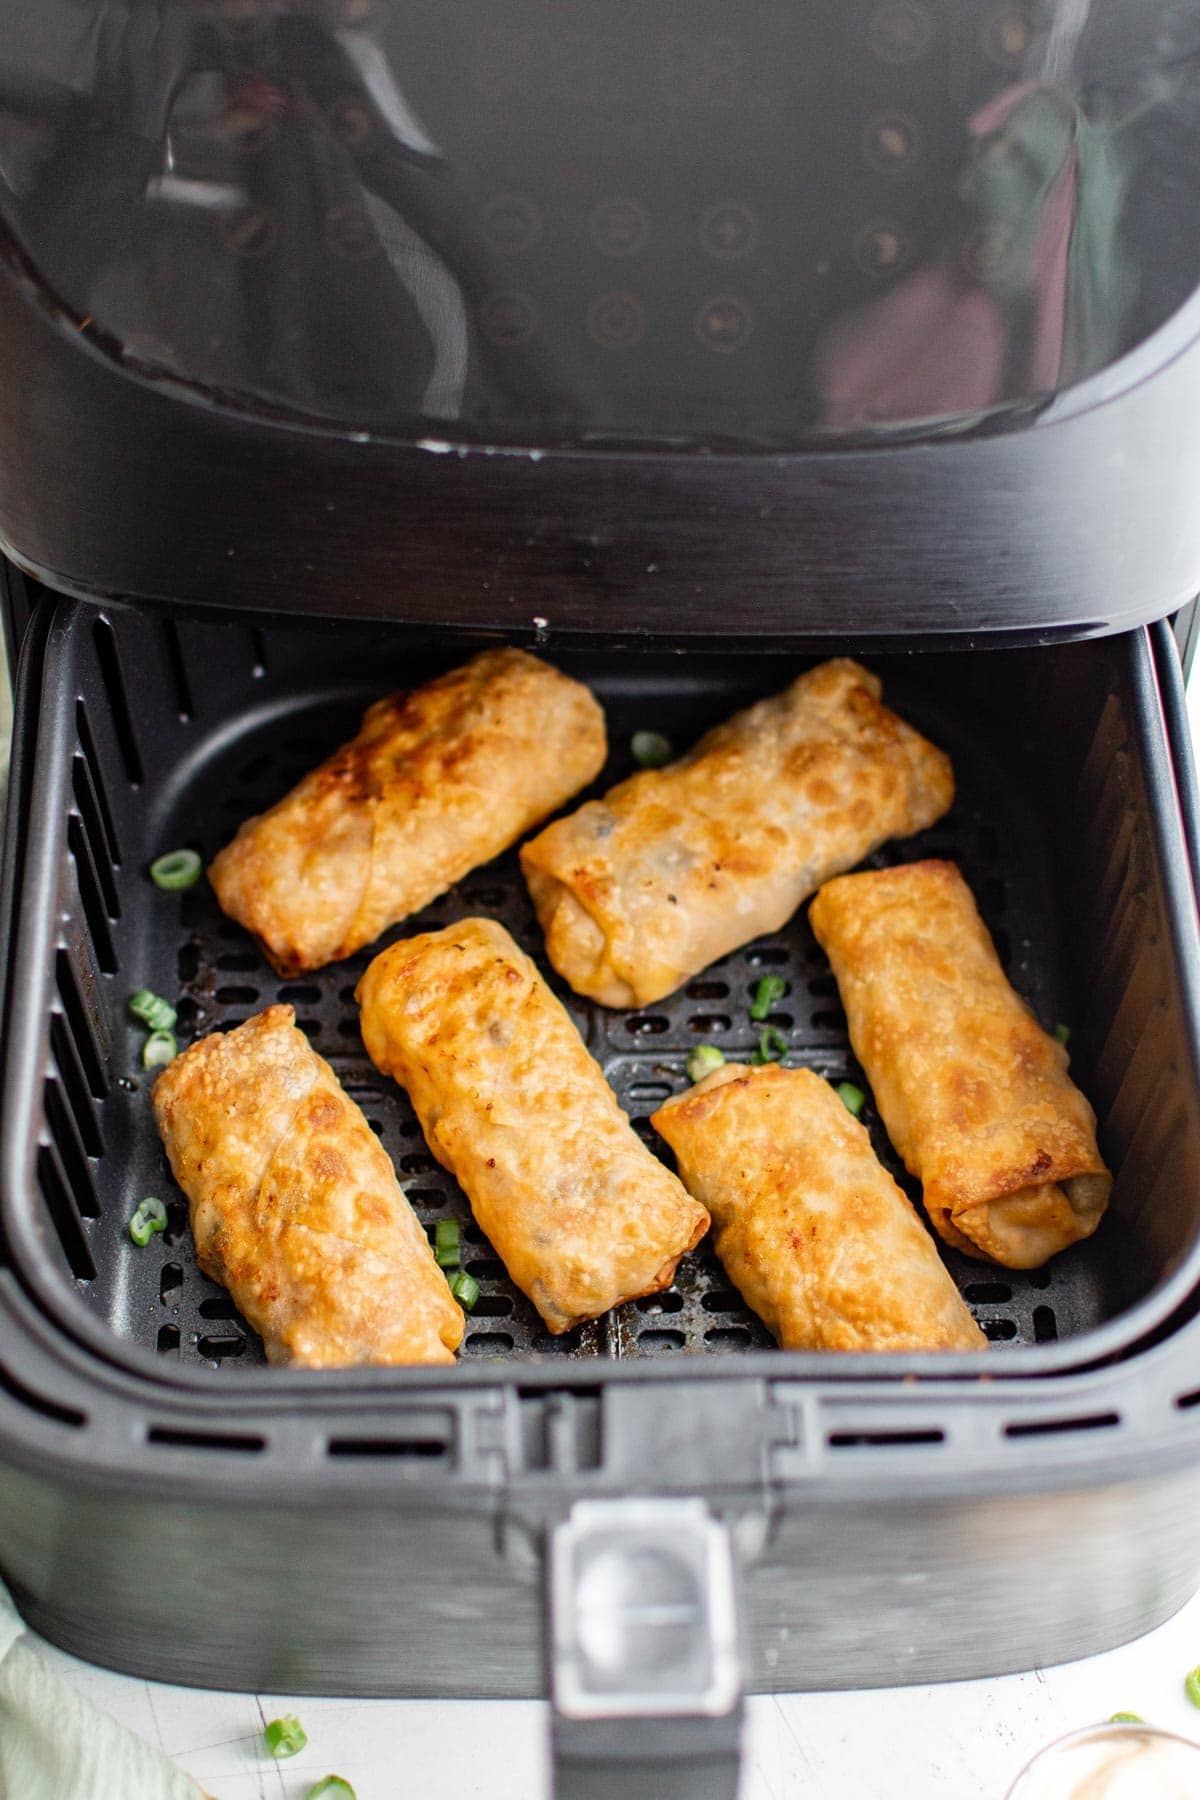 egg rolls cooked in an air fryer